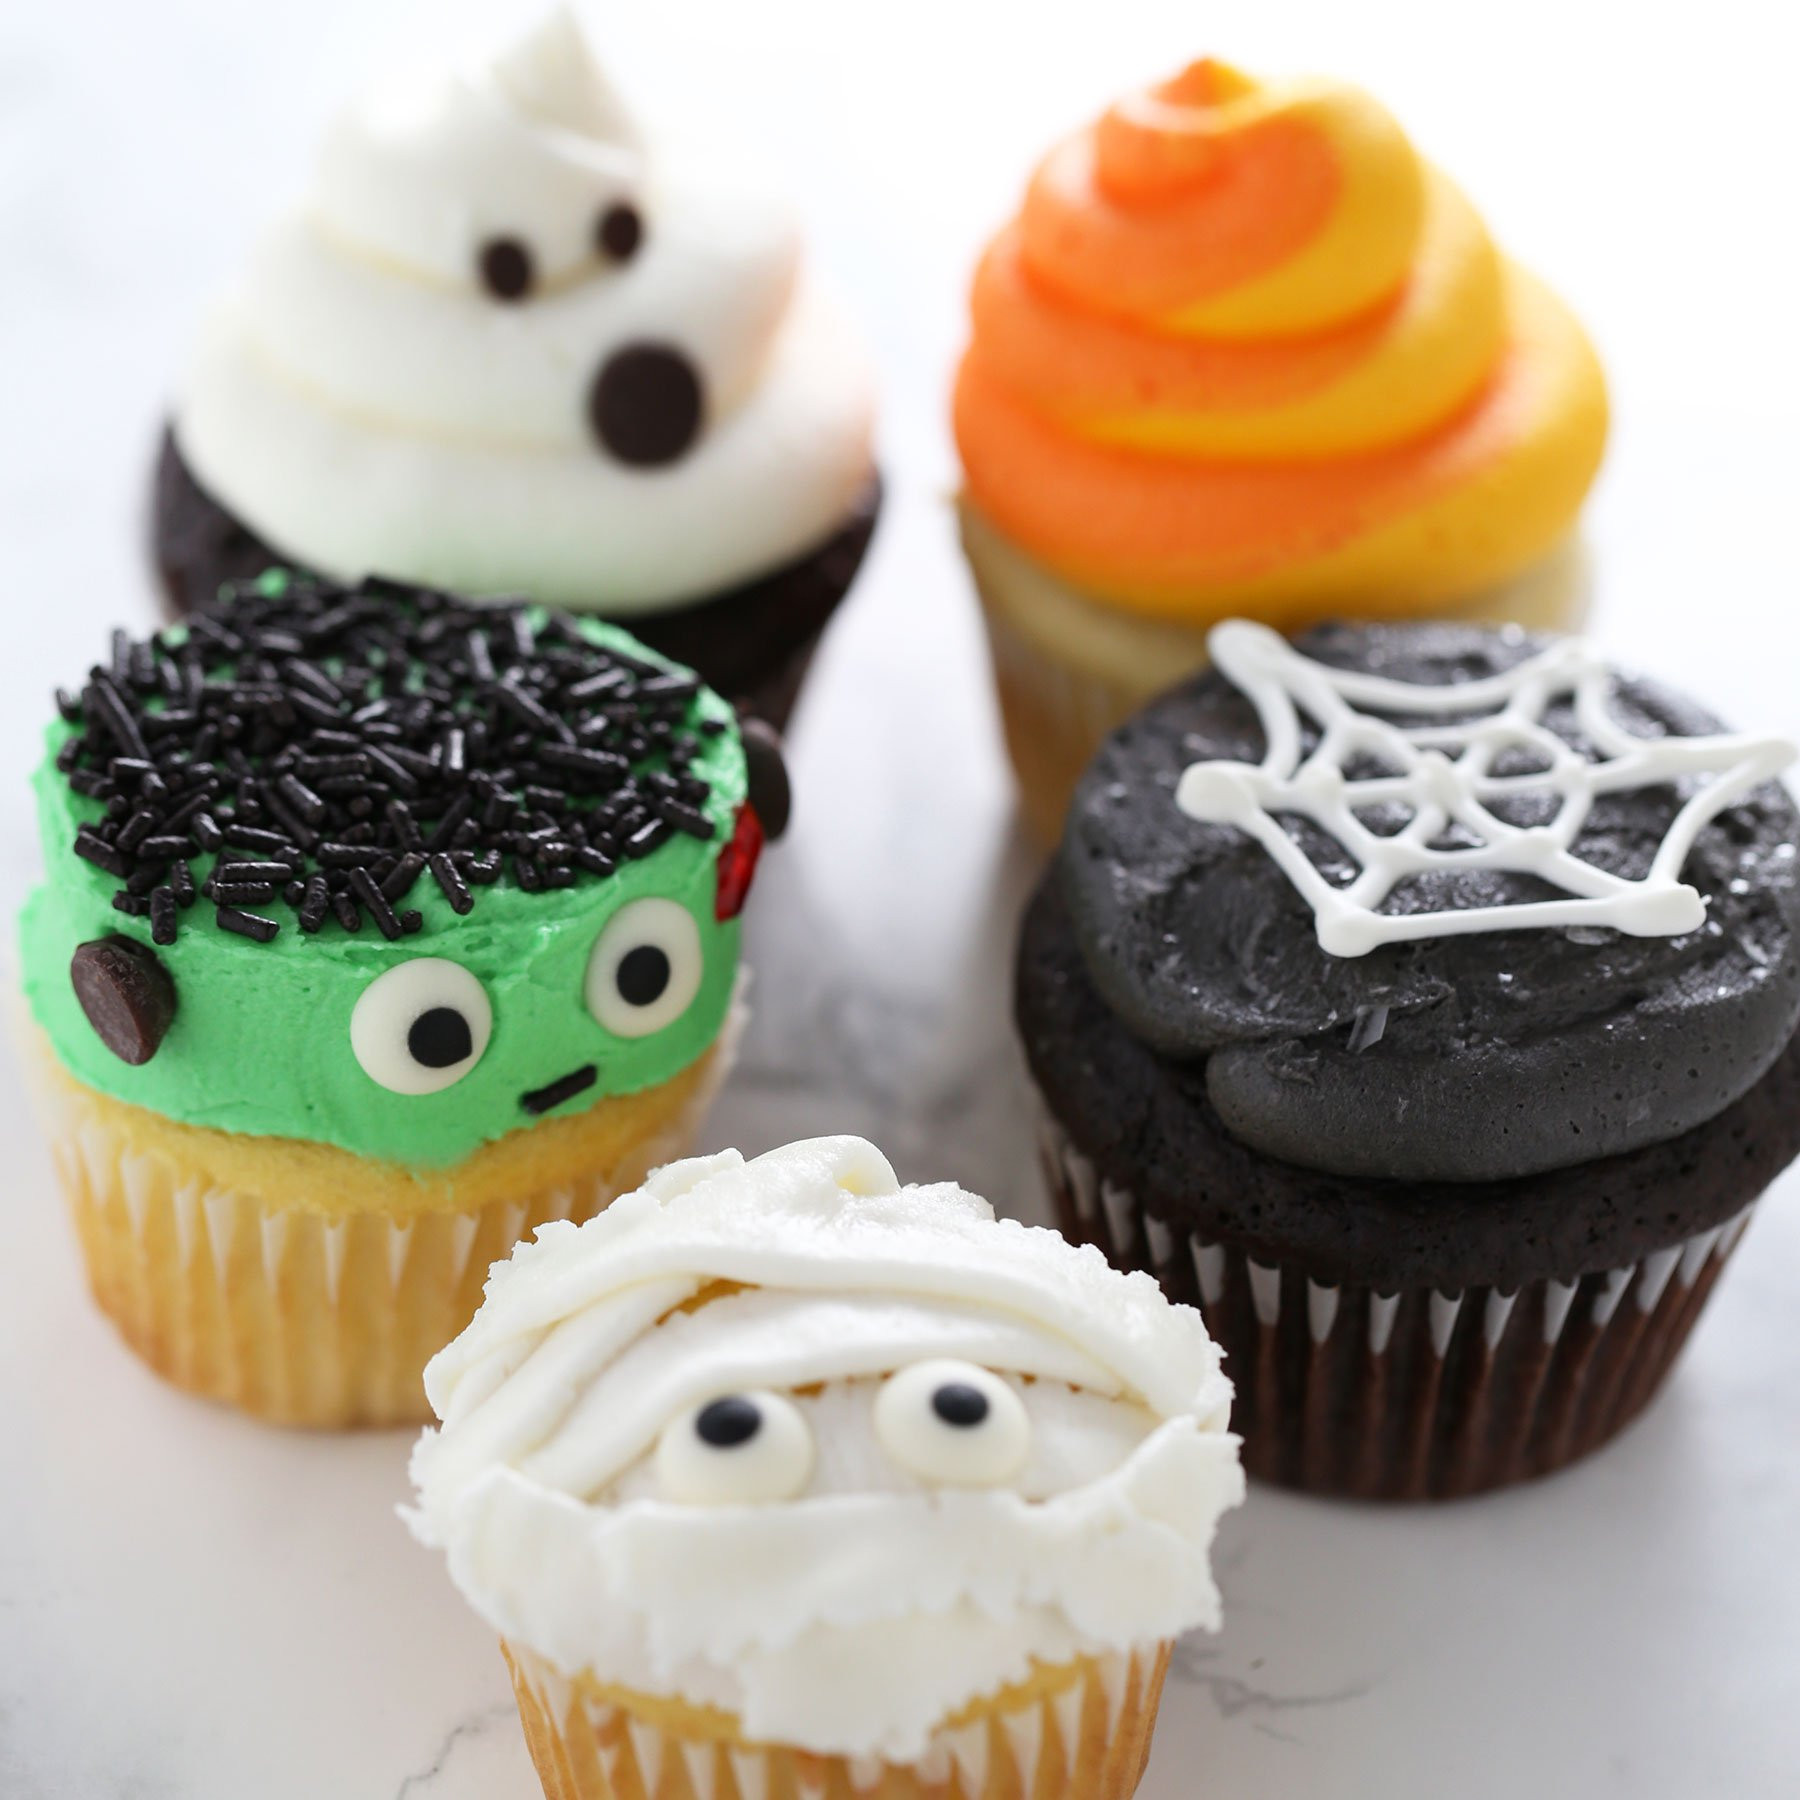 Picture Of Halloween Cupcakes
 How to Make Halloween Cupcakes Handle the Heat